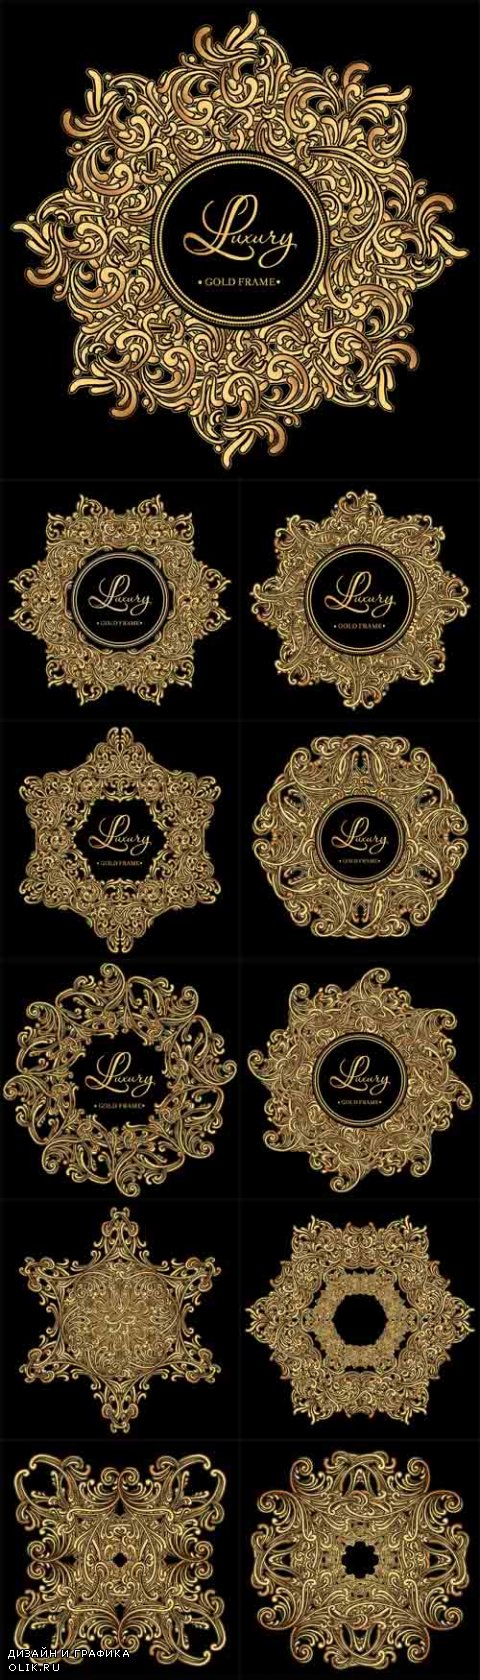 Vector Luxury golden vintage frame with curls and vignettes in the style of Baroque